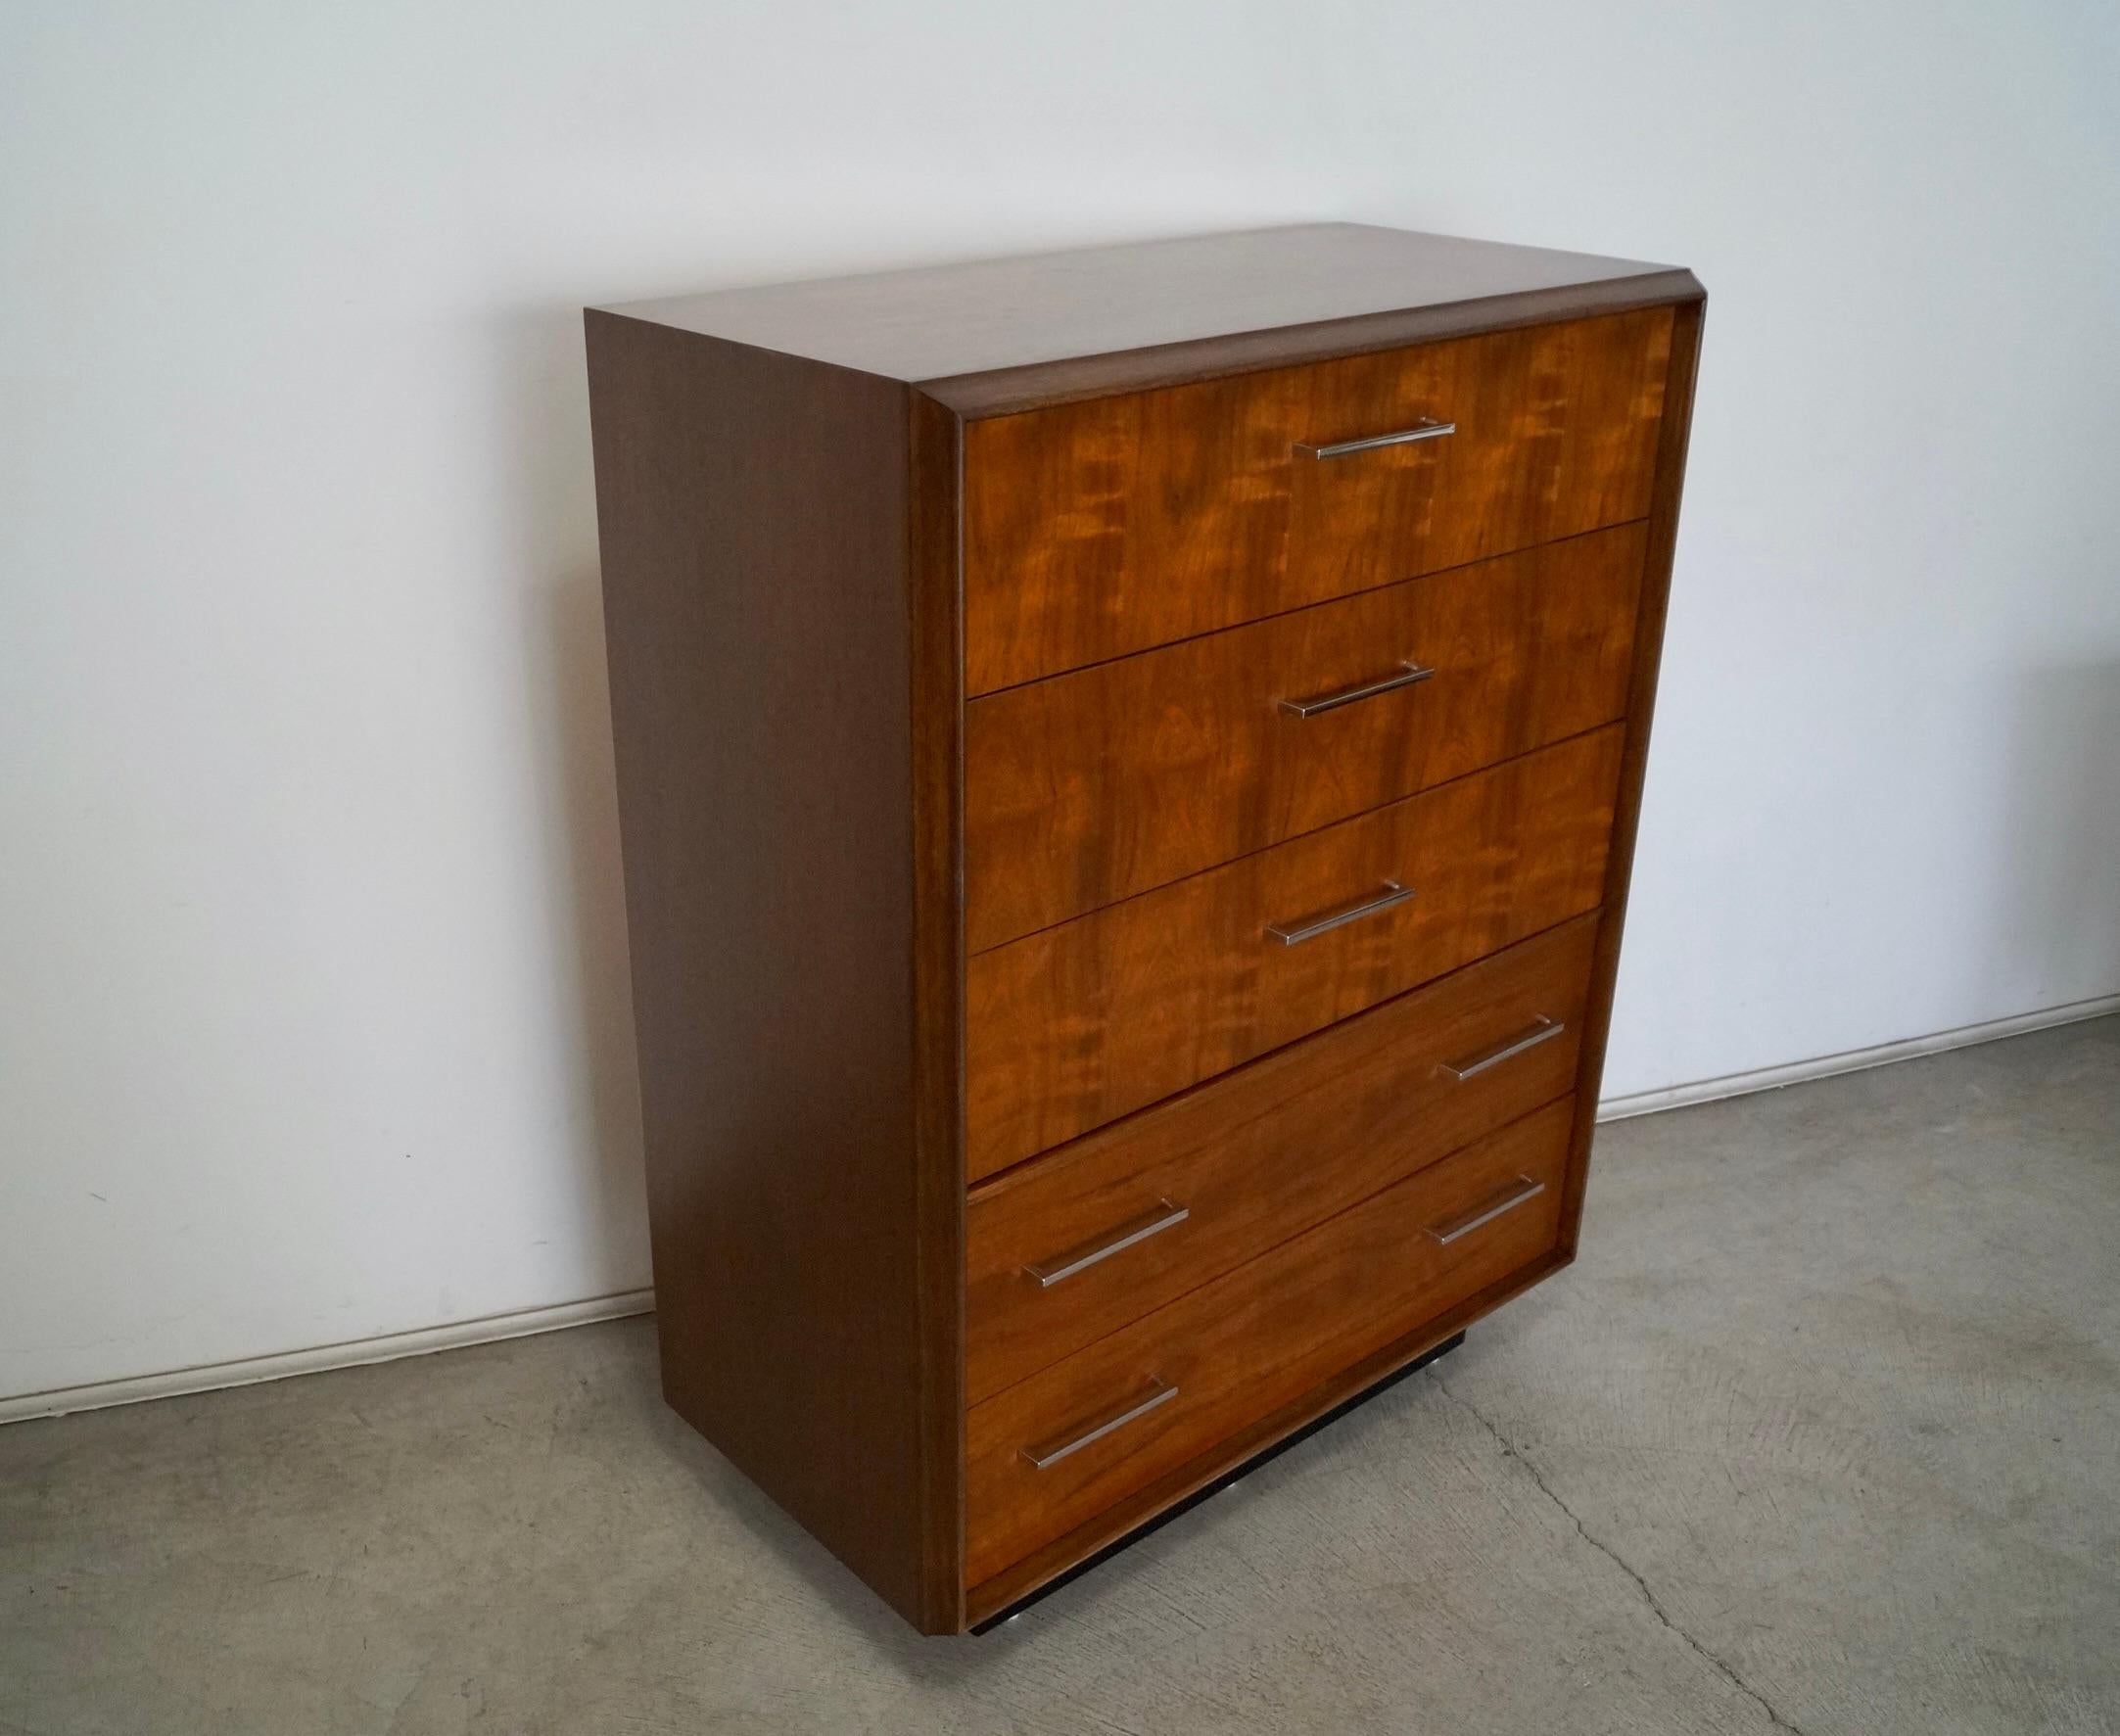 1960s Mid-Century Modern Highboy Dresser by Lane In Excellent Condition For Sale In Burbank, CA